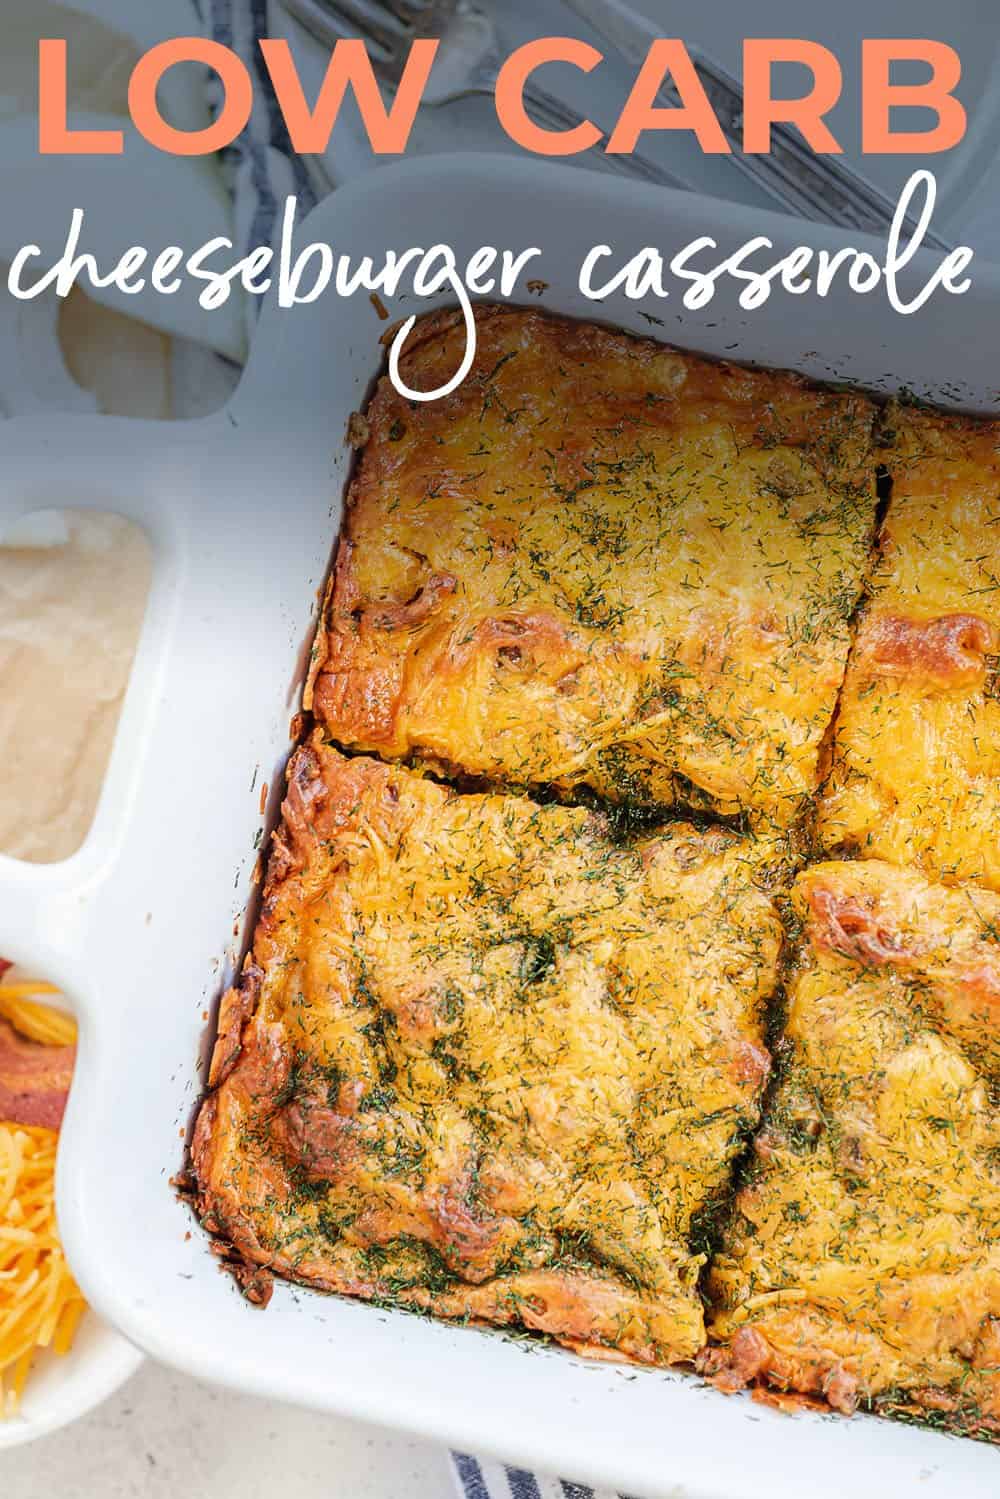 low carb cheeseburger casserole in white baking dish.